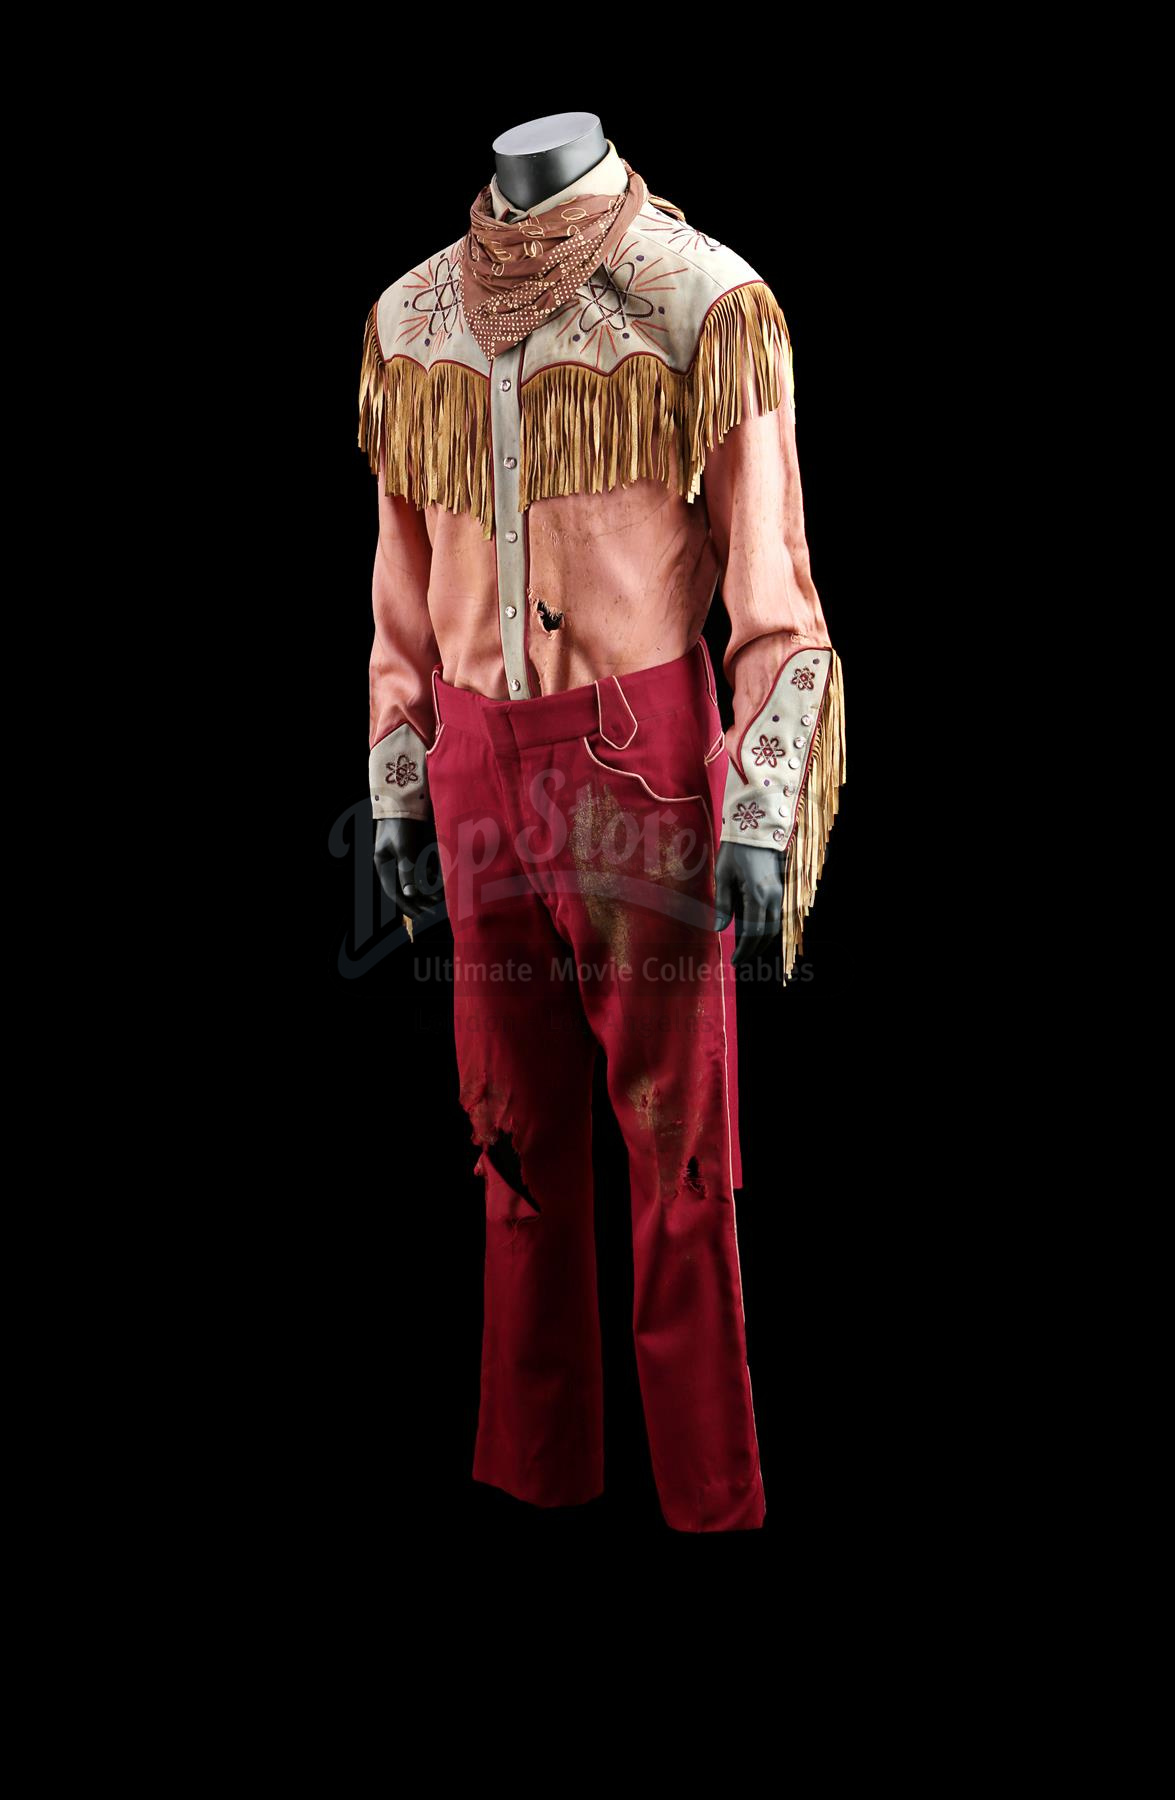 BACK TO THE FUTURE PART III (1990) - Marty McFly's (Michael J. Fox) 1885  Western Costume - Current price: £17000